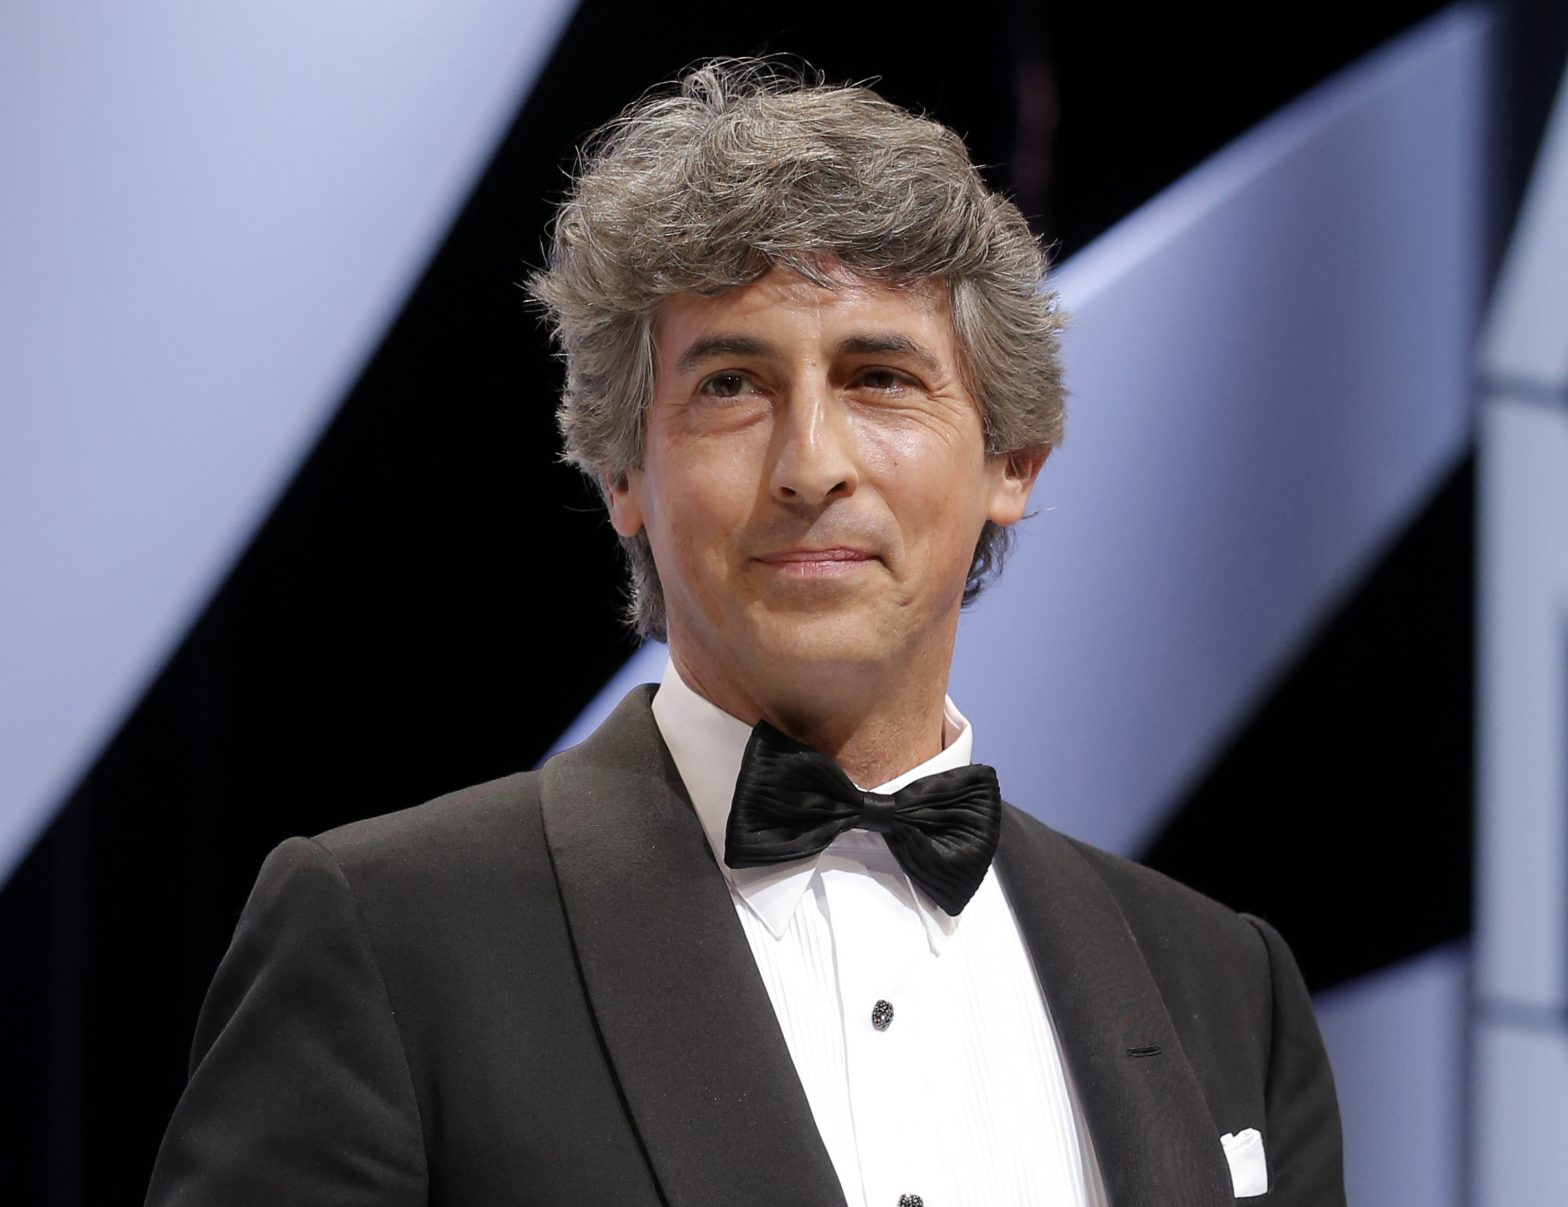 FILE - This May 26, 2013 file photo shows director Alexander Payne during an awards ceremony at the 66th international film festival, in Cannes, southern France. (Photo by Todd Williamson/Invision/AP, File)